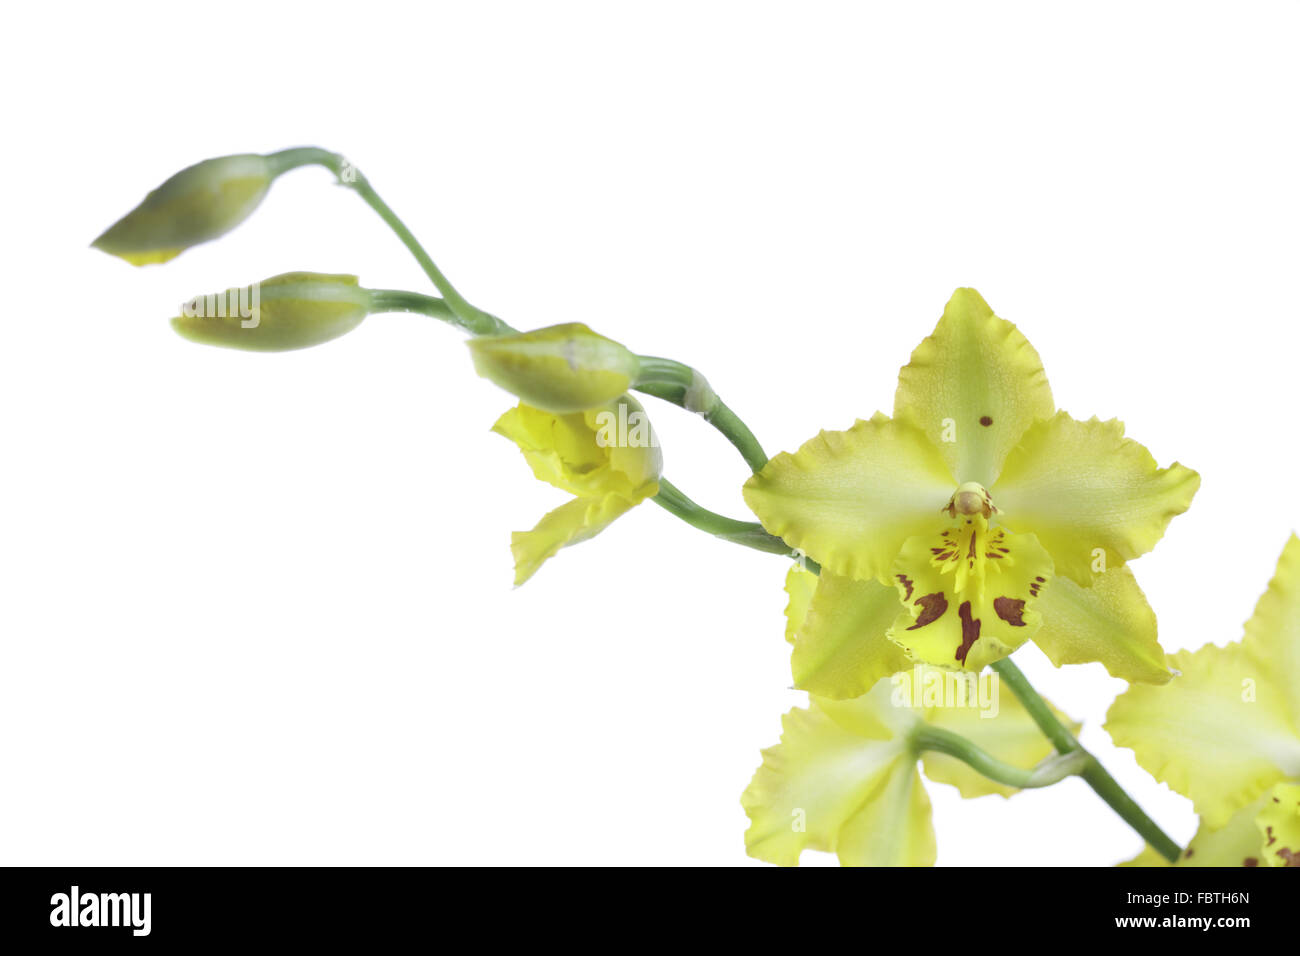 Orchid hybrids with yellow flowers Stock Photo